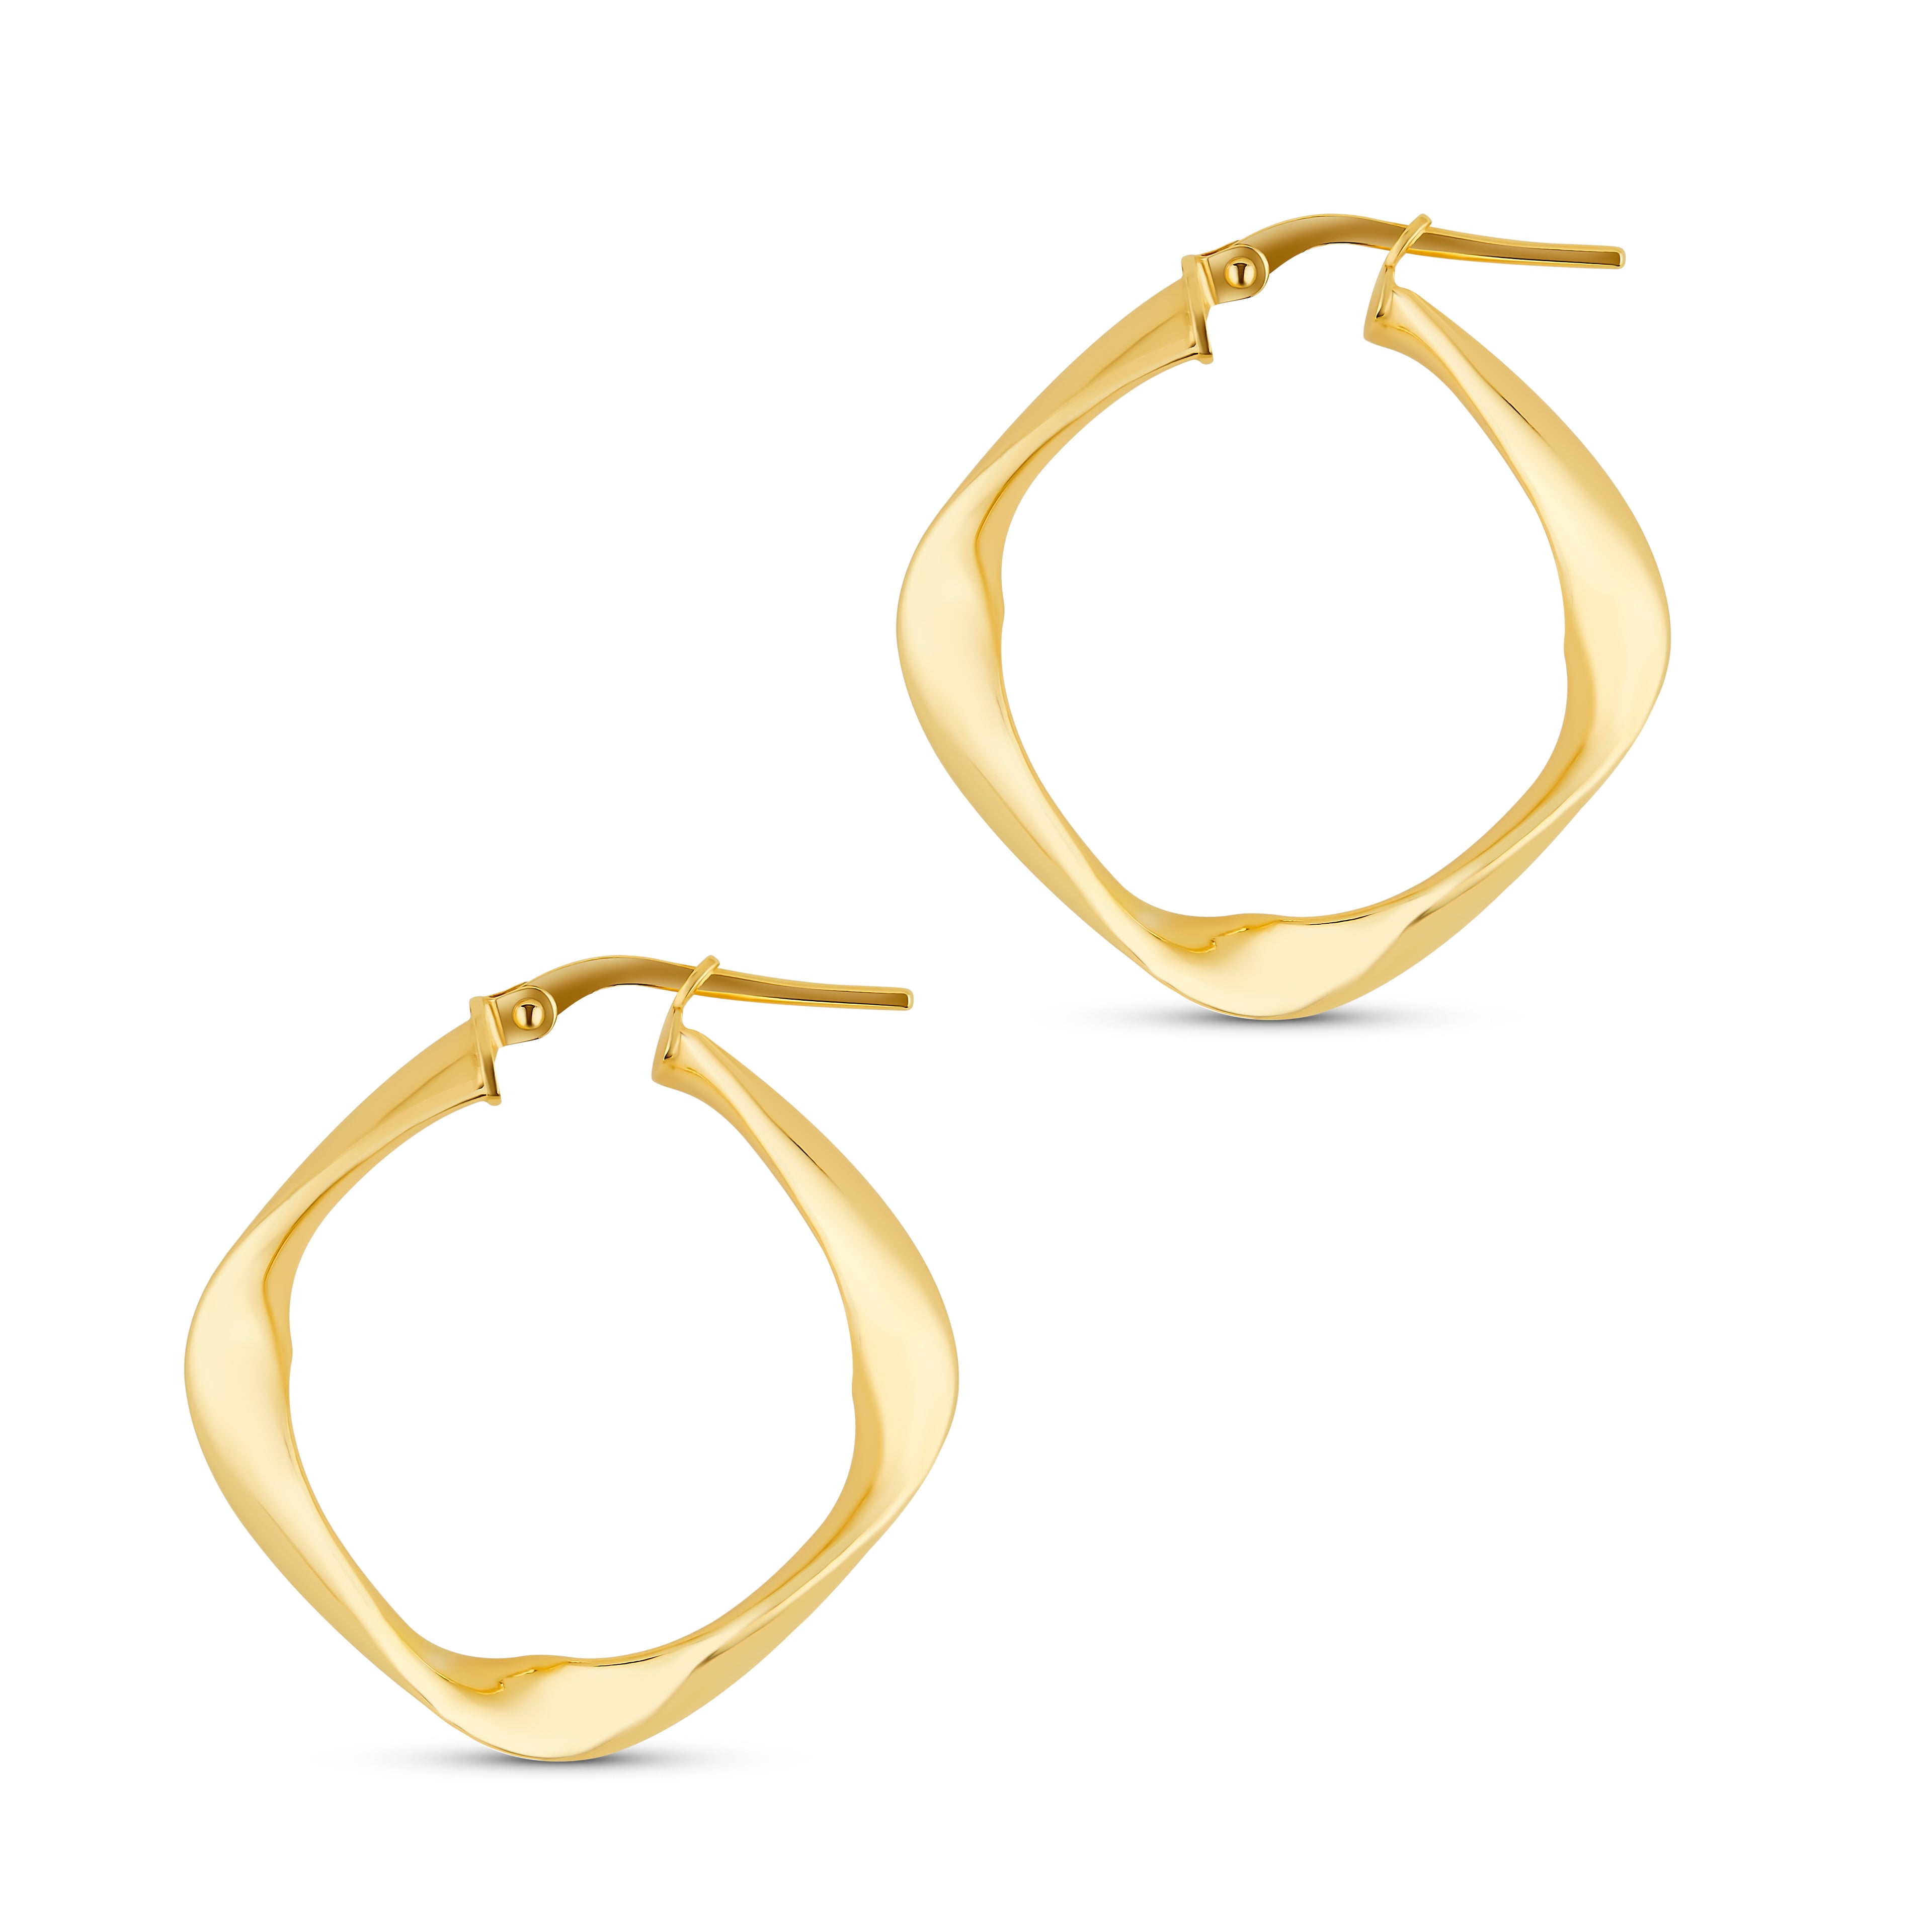 Shiny Square Gold Small Hoops - The Hoop Station 